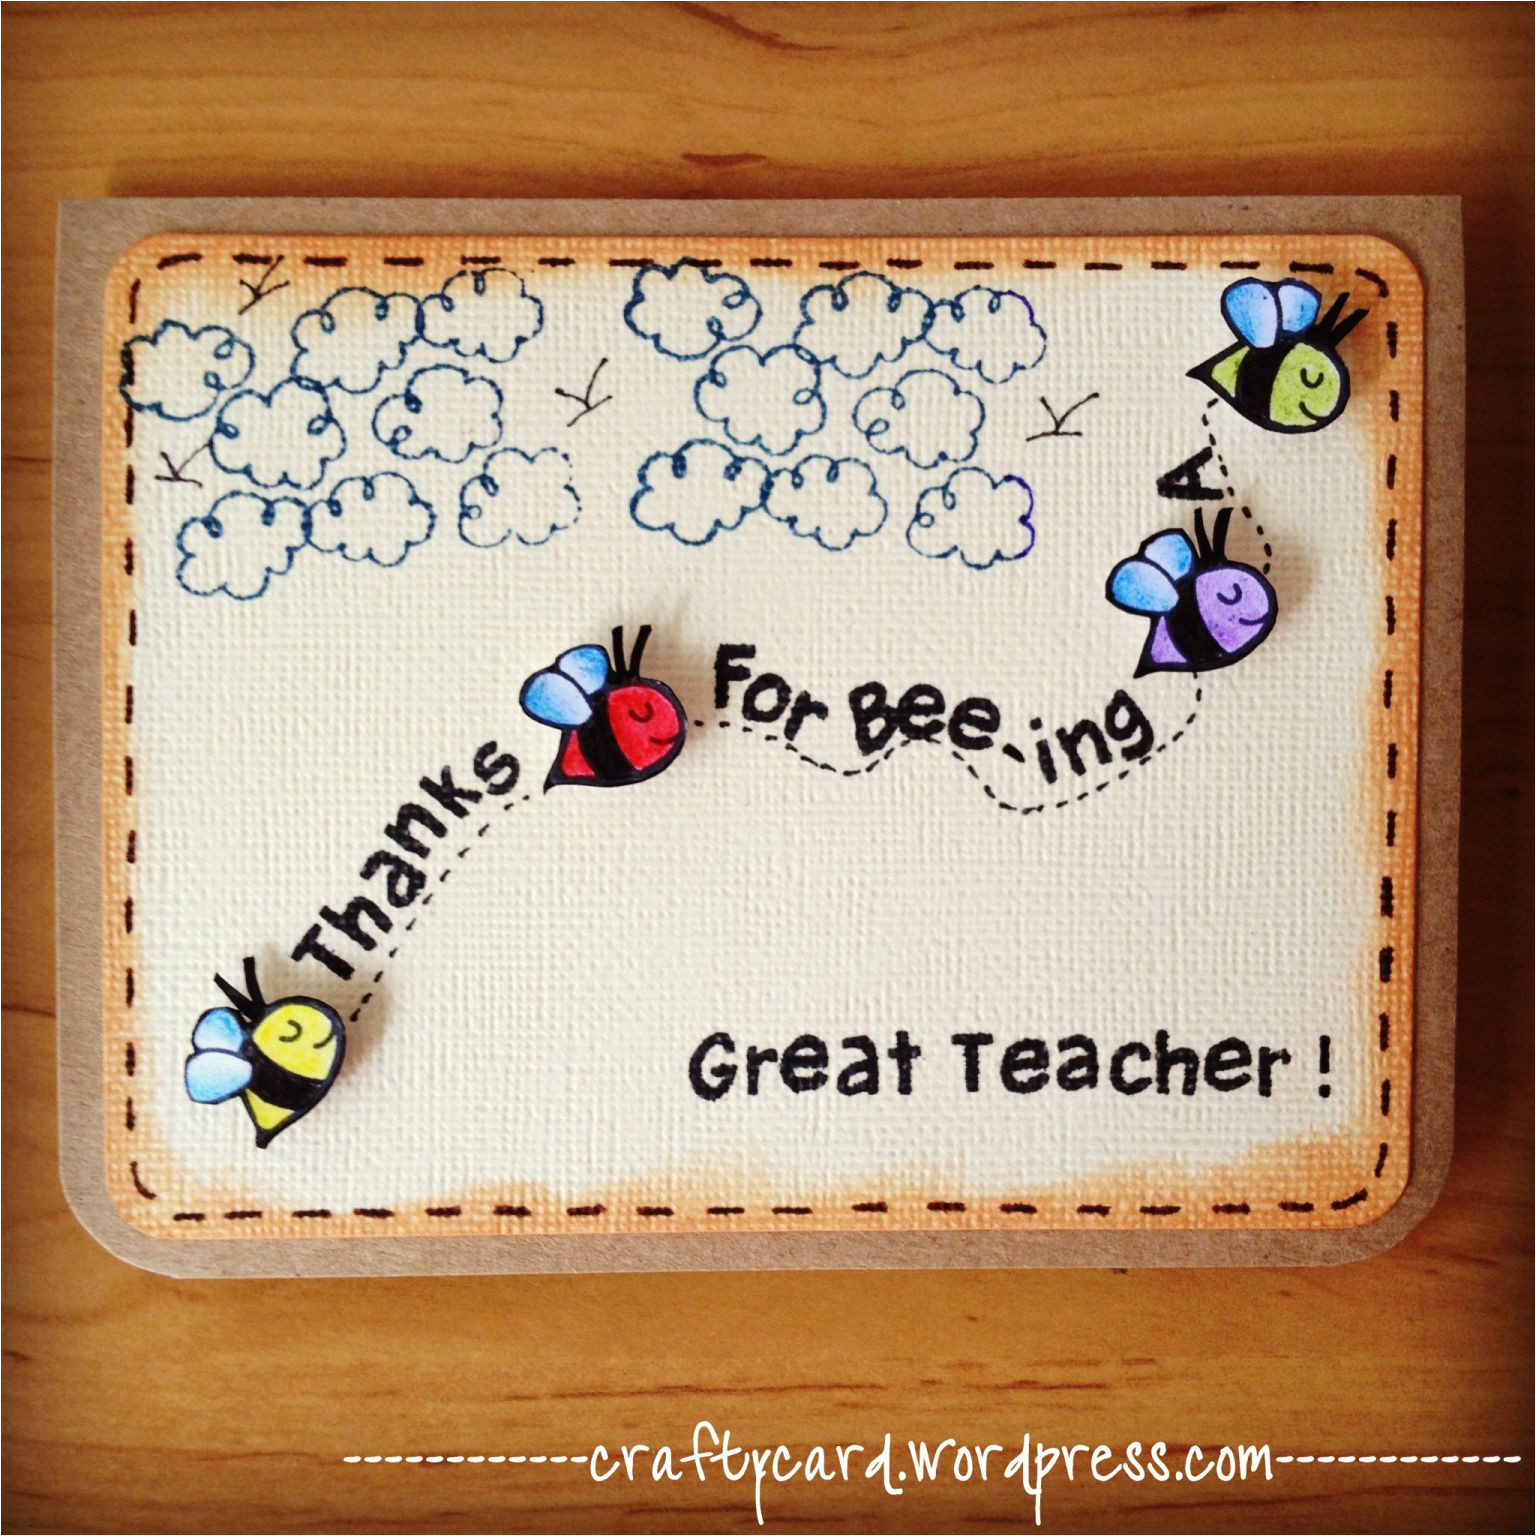 Design Of Teachers Day Card M203 Thanks for Bee Ing A Great Teacher with Images